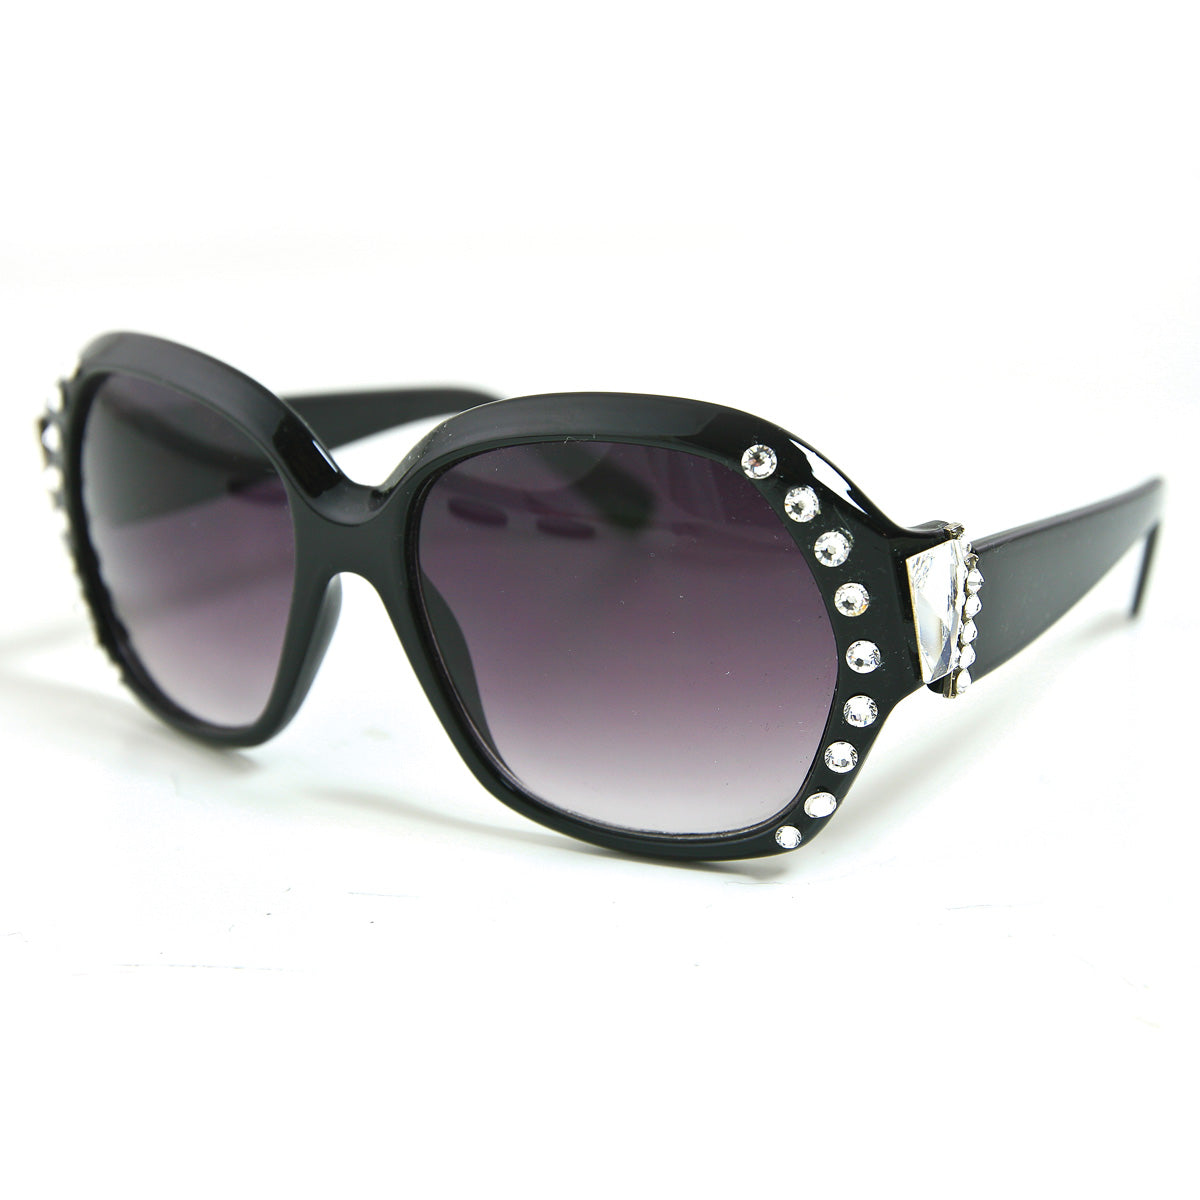 Sunglasses Made with Swarovski Elements, black color, side view